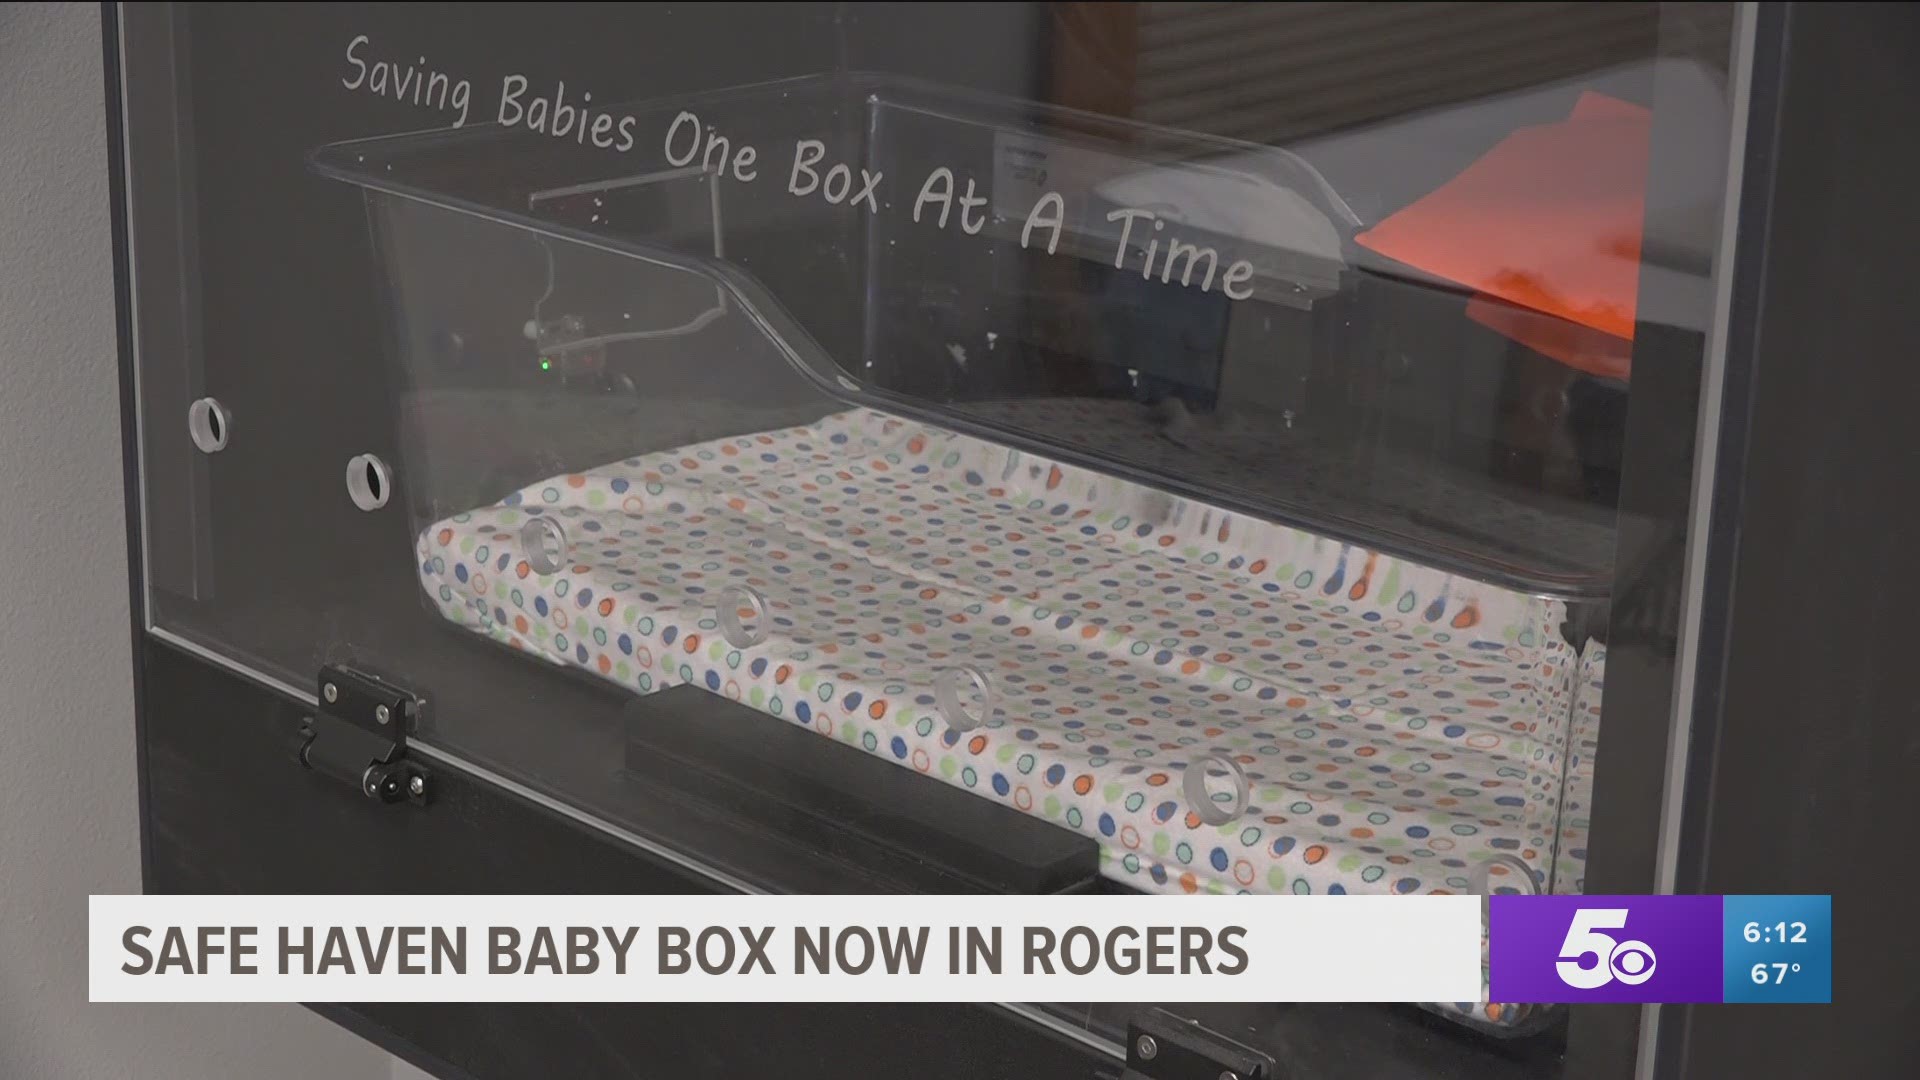 Mothers in crisis can surrender their infant in the box anonymously and safely with no questions asked.